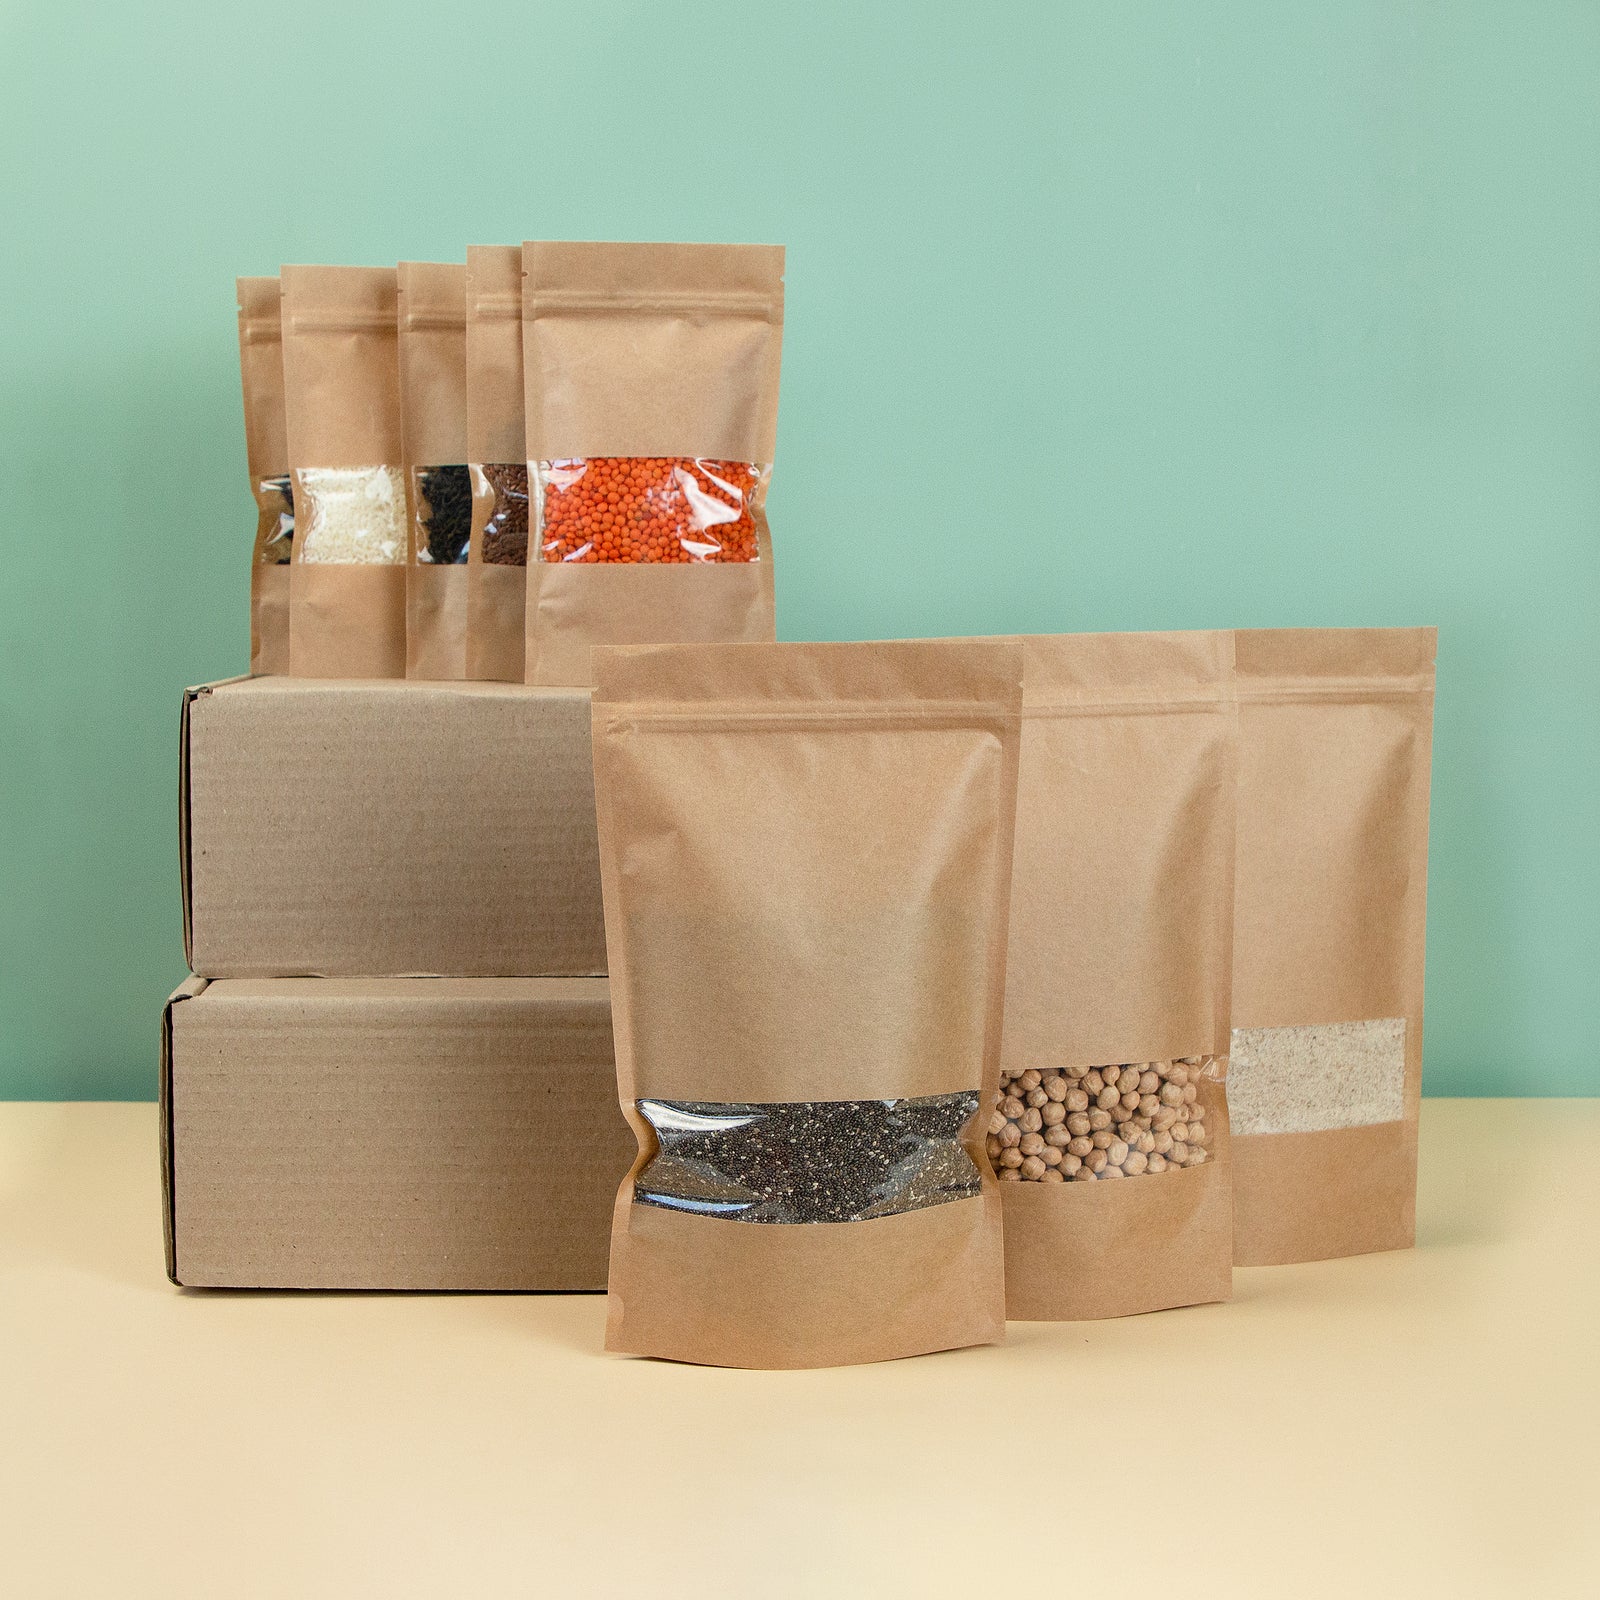 Brown kraft paper doypack bags with groceries front view on a yellow background. Packaging for foods and goods template mock-up. Packs with windows for weight products. Trendy color